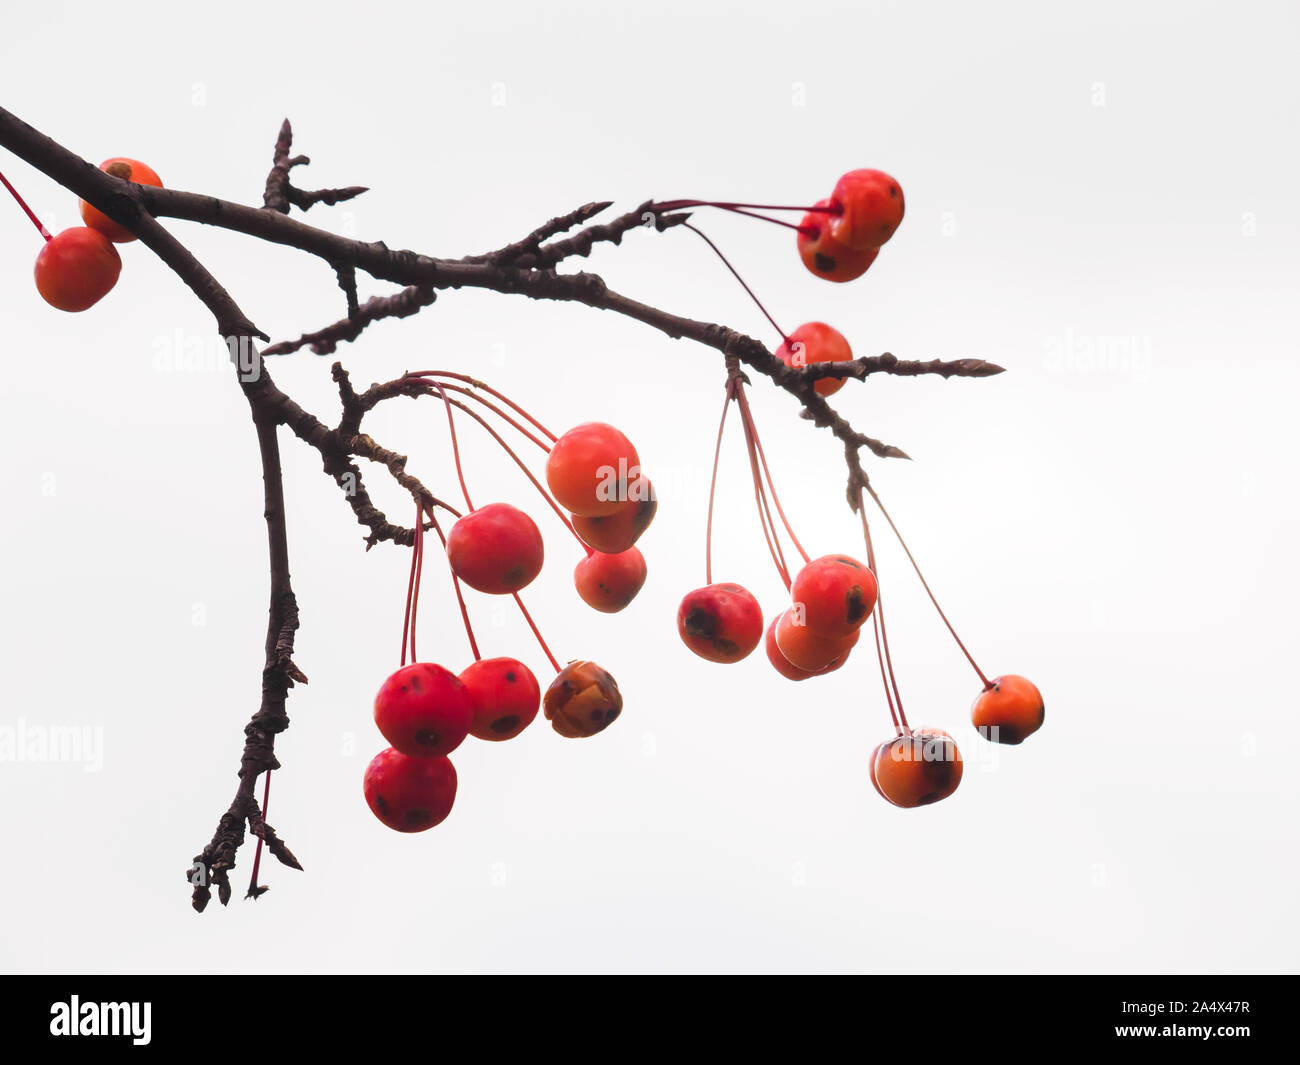 Small red fruit of Chinese crab apple with imperfections, hanging off a branch against the white sky. Stock Photo